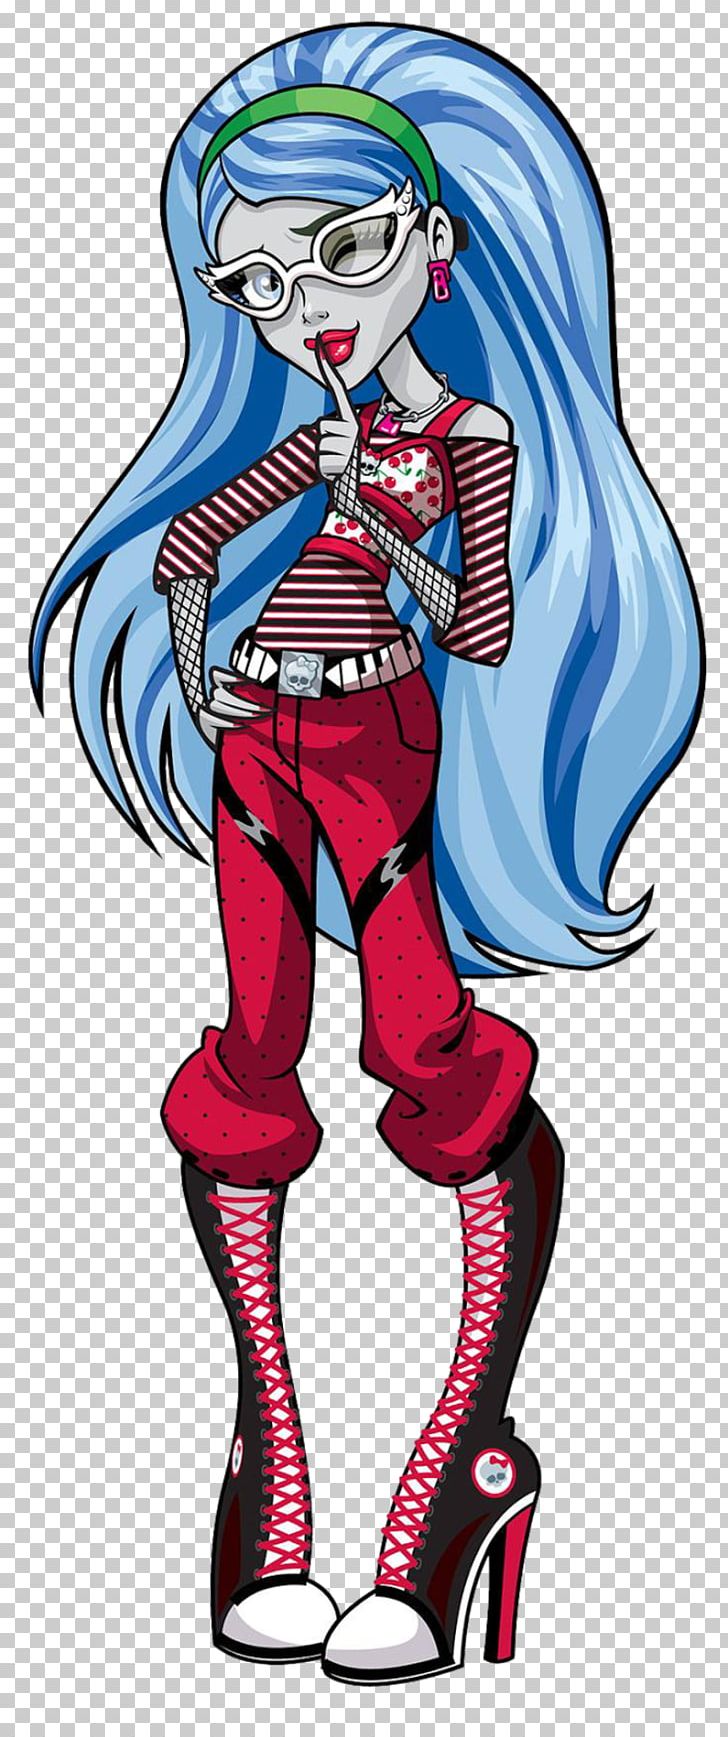 Monster High Ghoulia Yelps Monster High Ghoulia Yelps Lagoona Blue Frankie Stein PNG, Clipart, Art, Barbie, Cartoon, Costume Design, Doll Free PNG Download